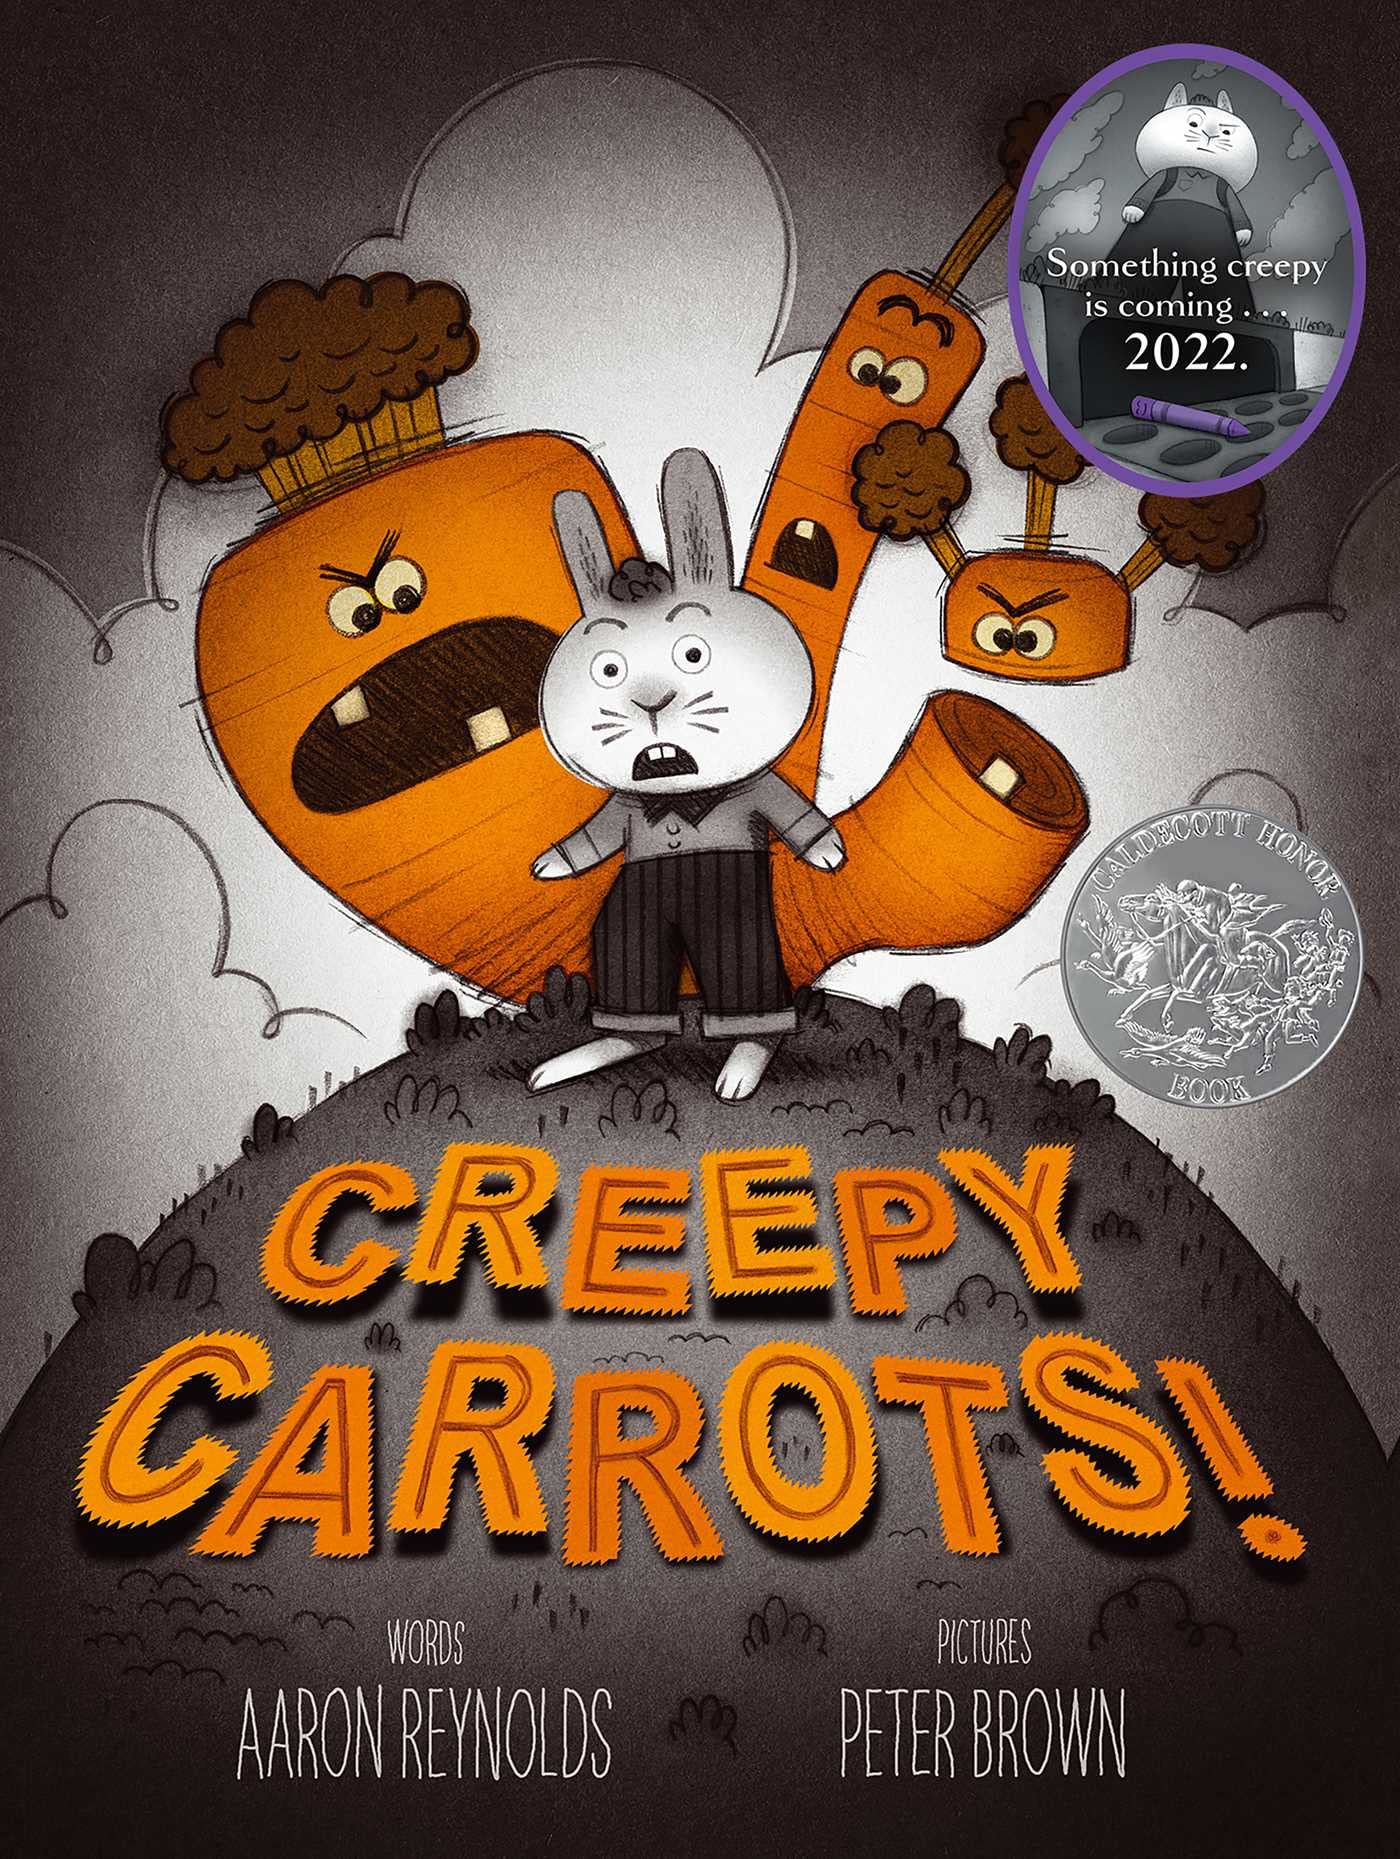 speech and language teaching concepts for Creepy Carrots in speech therapy